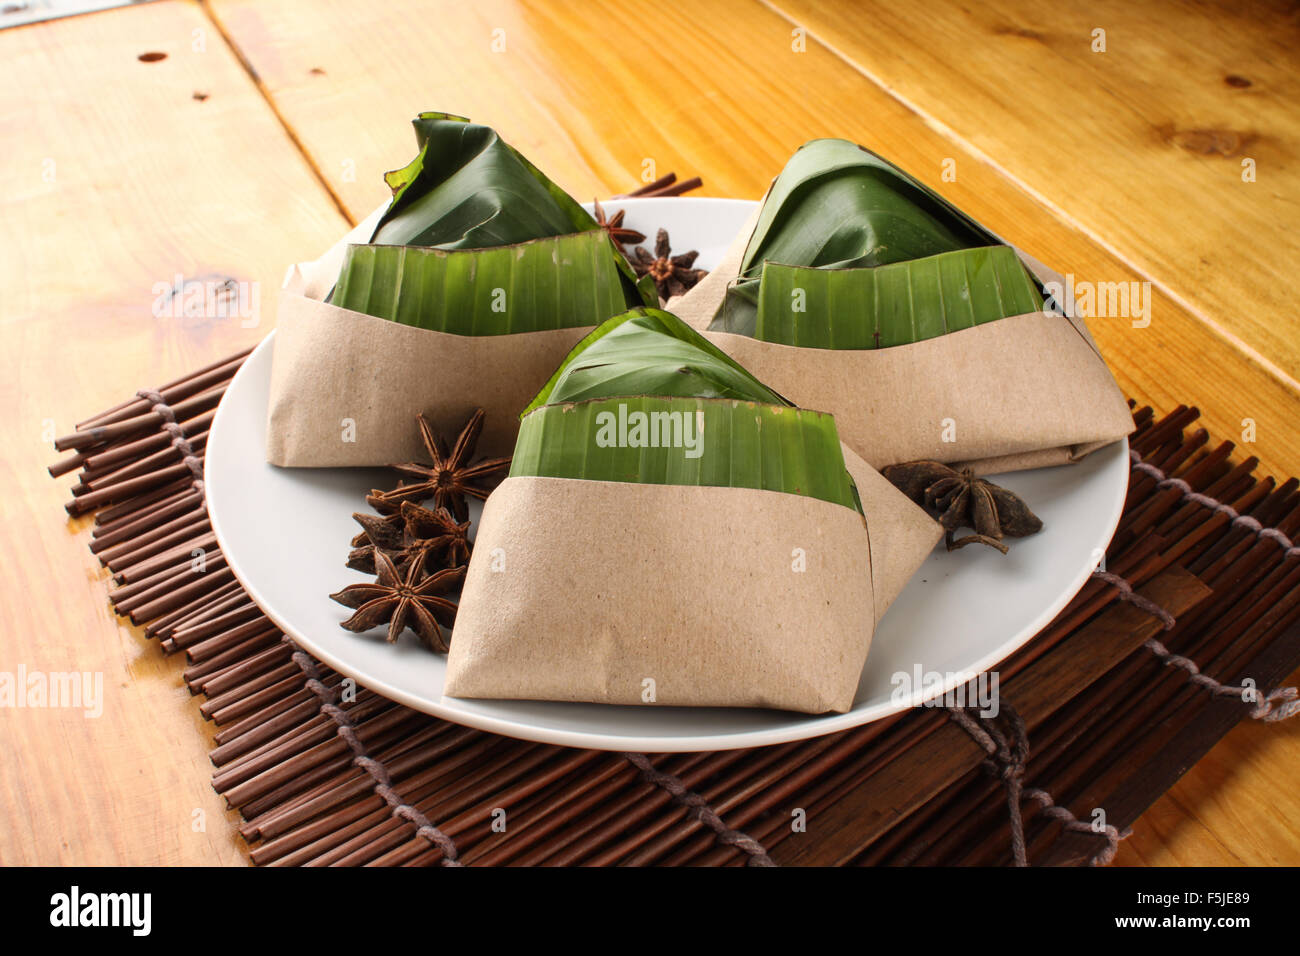 traditional fresh Malaysian nasi lemak packed with banana leaf in wood background Stock Photo